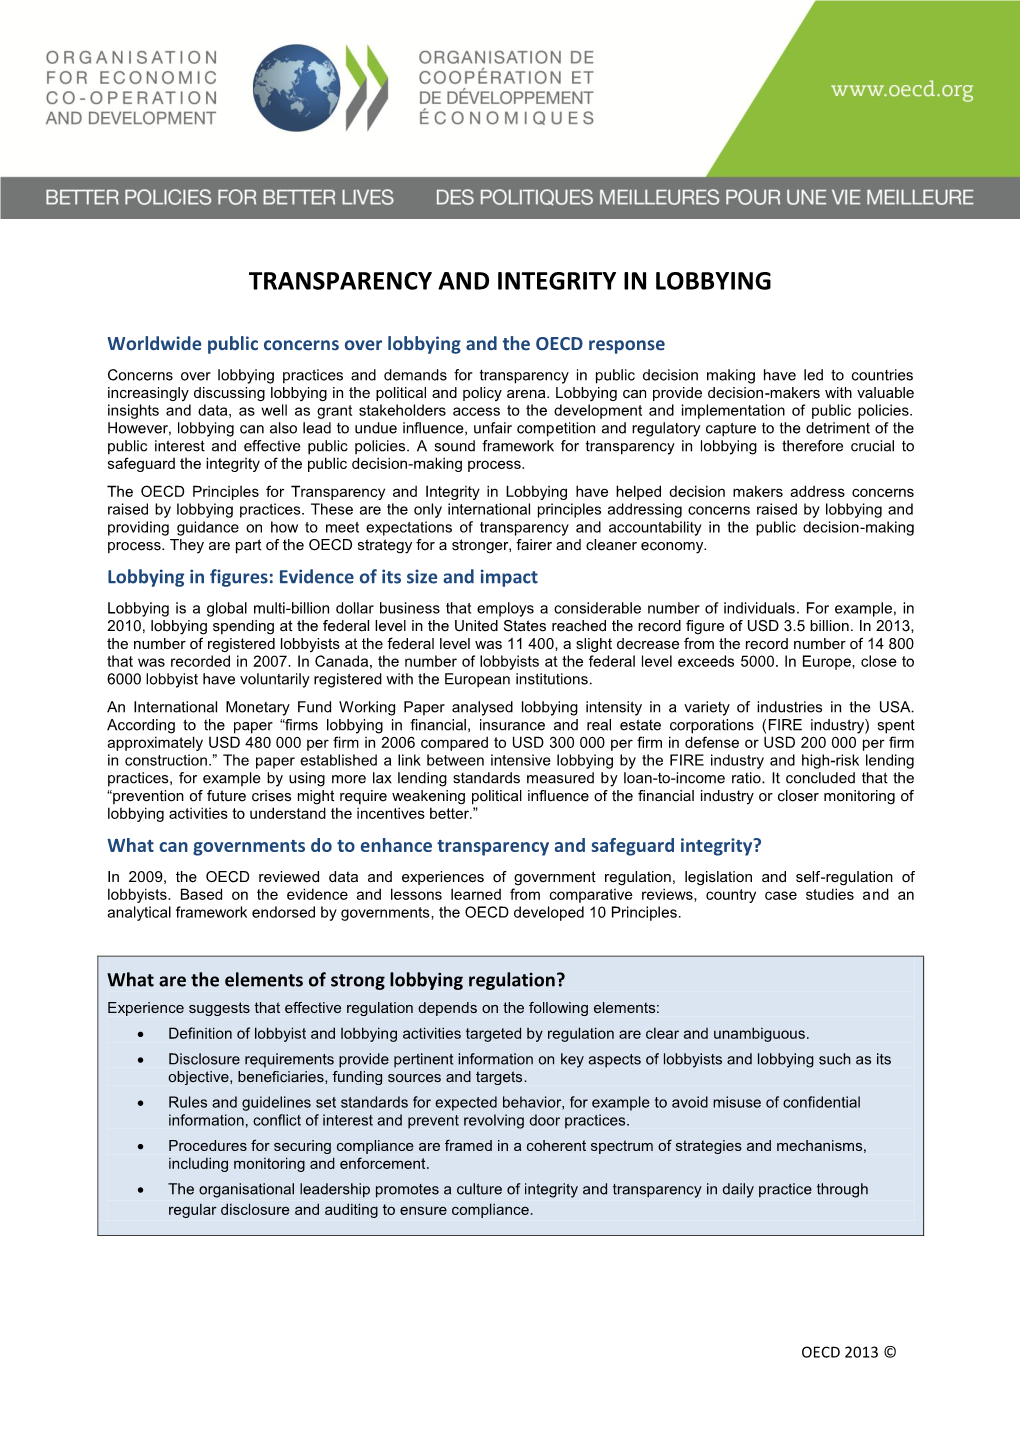 Transparency and Integrity in Lobbying